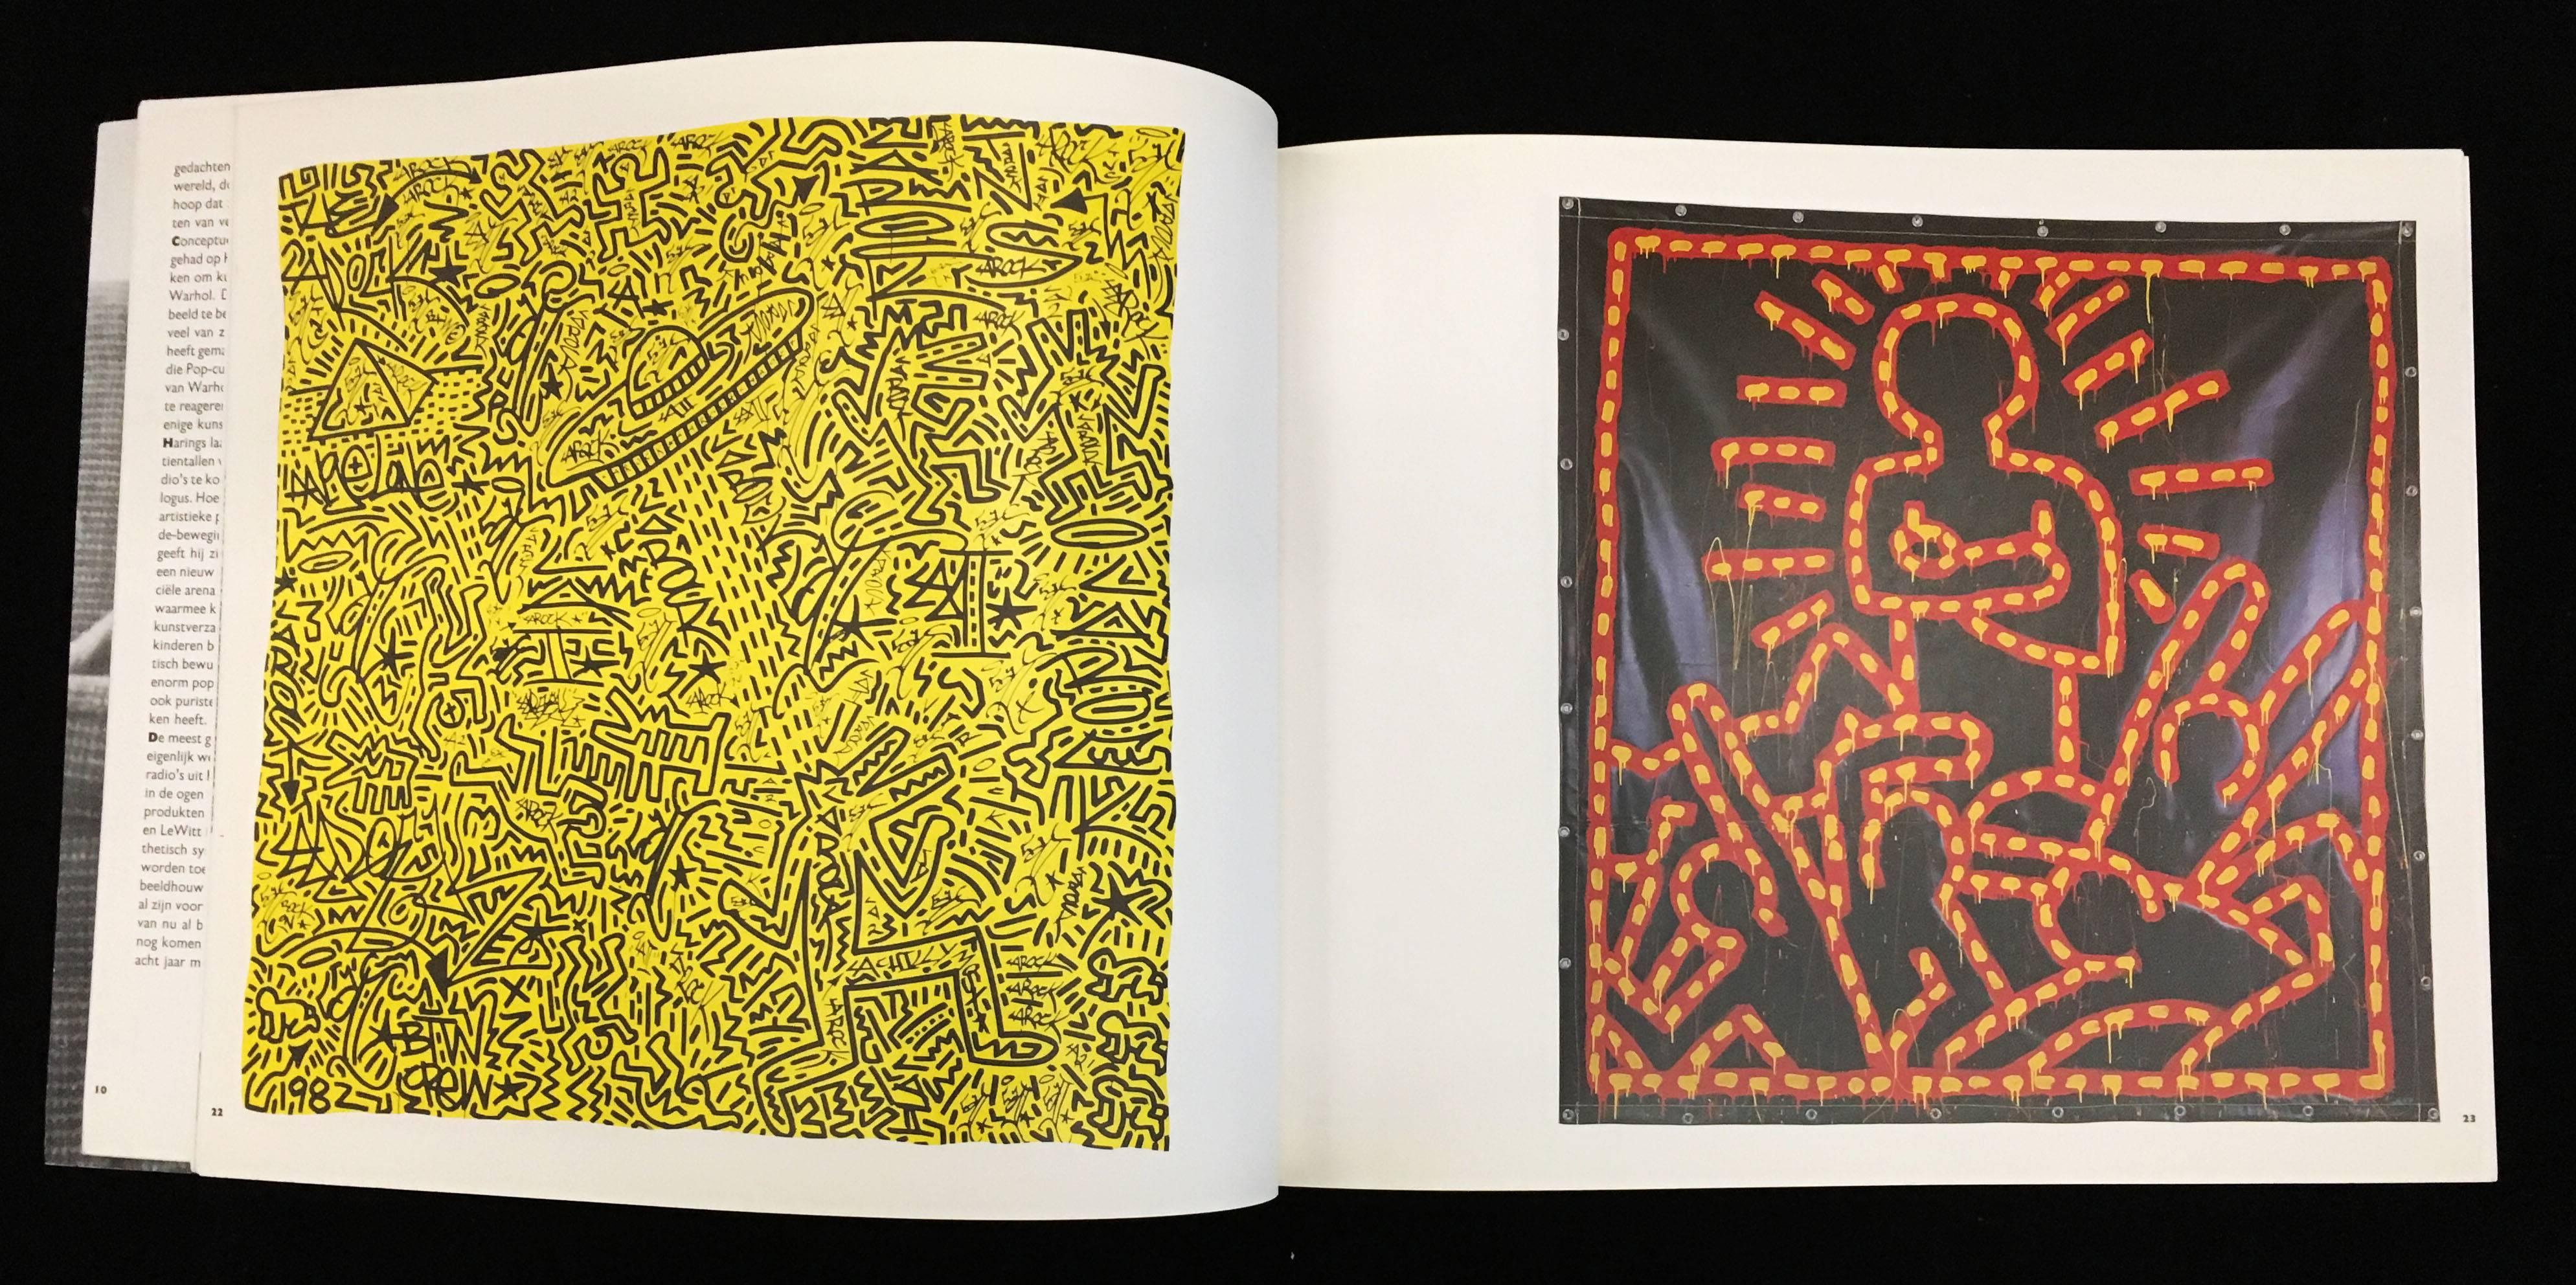 Keith Haring Stedelijk Museum 1986 (Keith Haring 1986 exhibition catalog) For Sale 2